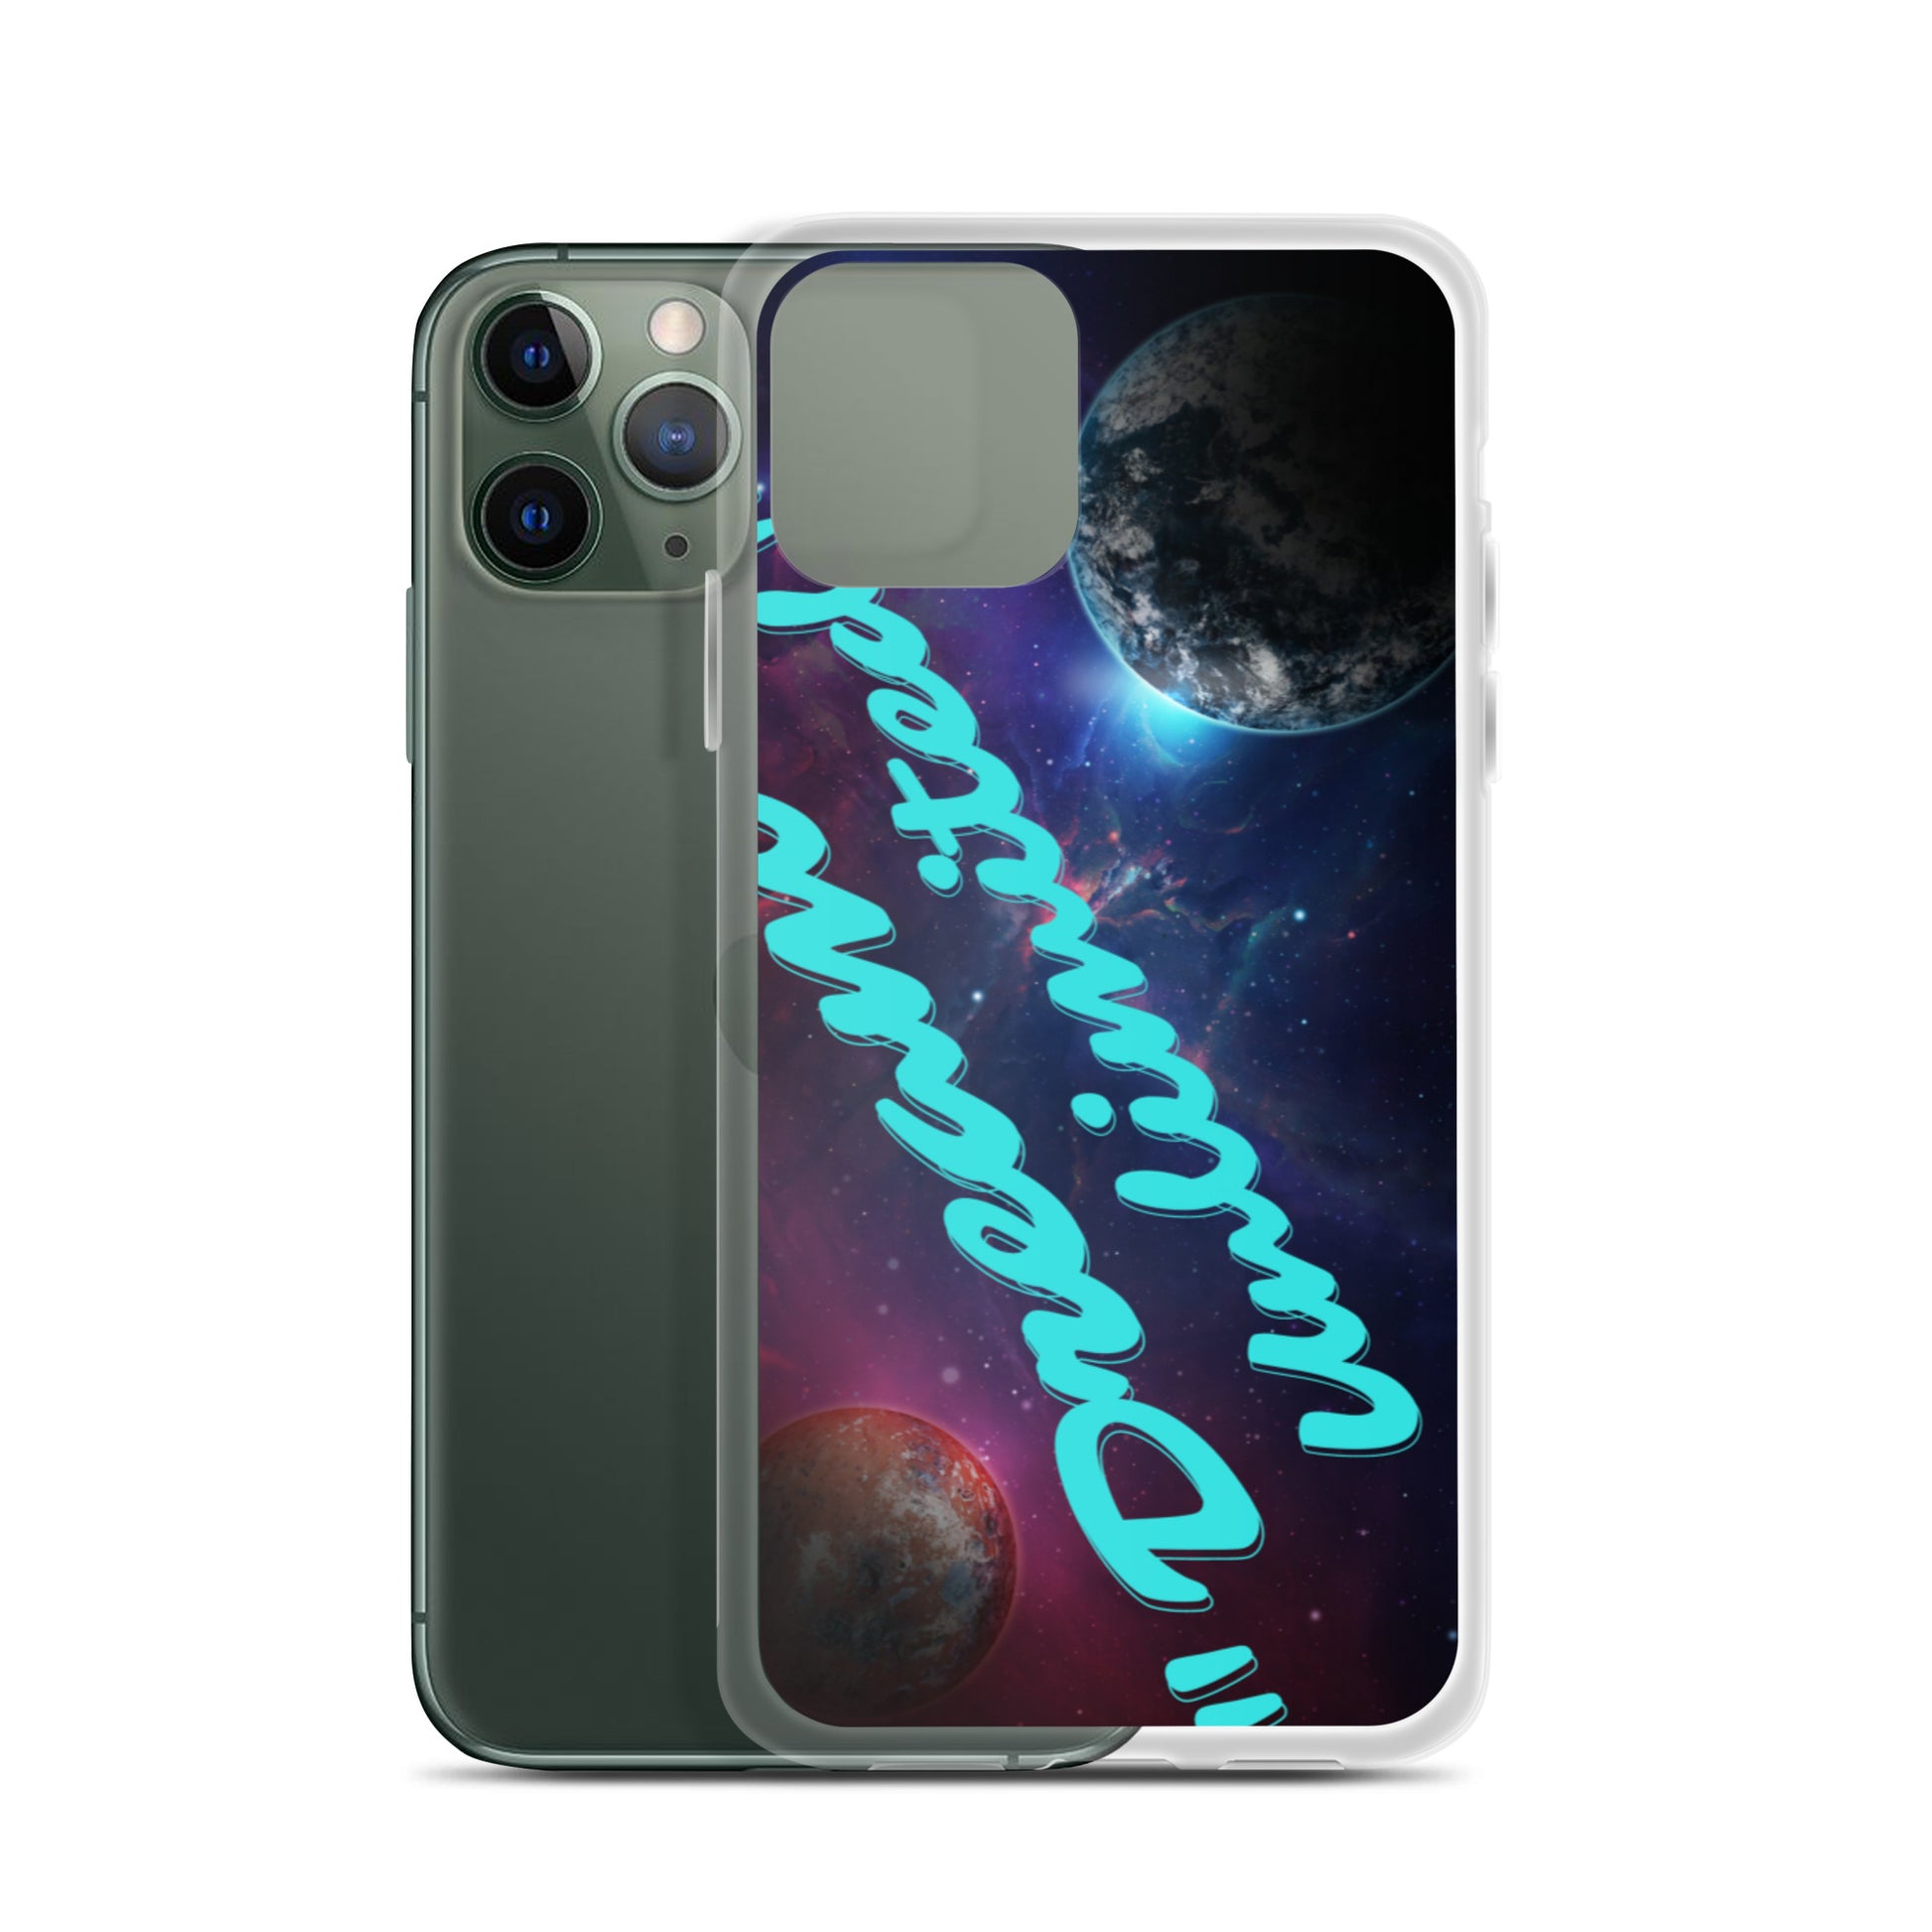 "DreamUnlimited" iPhone Case